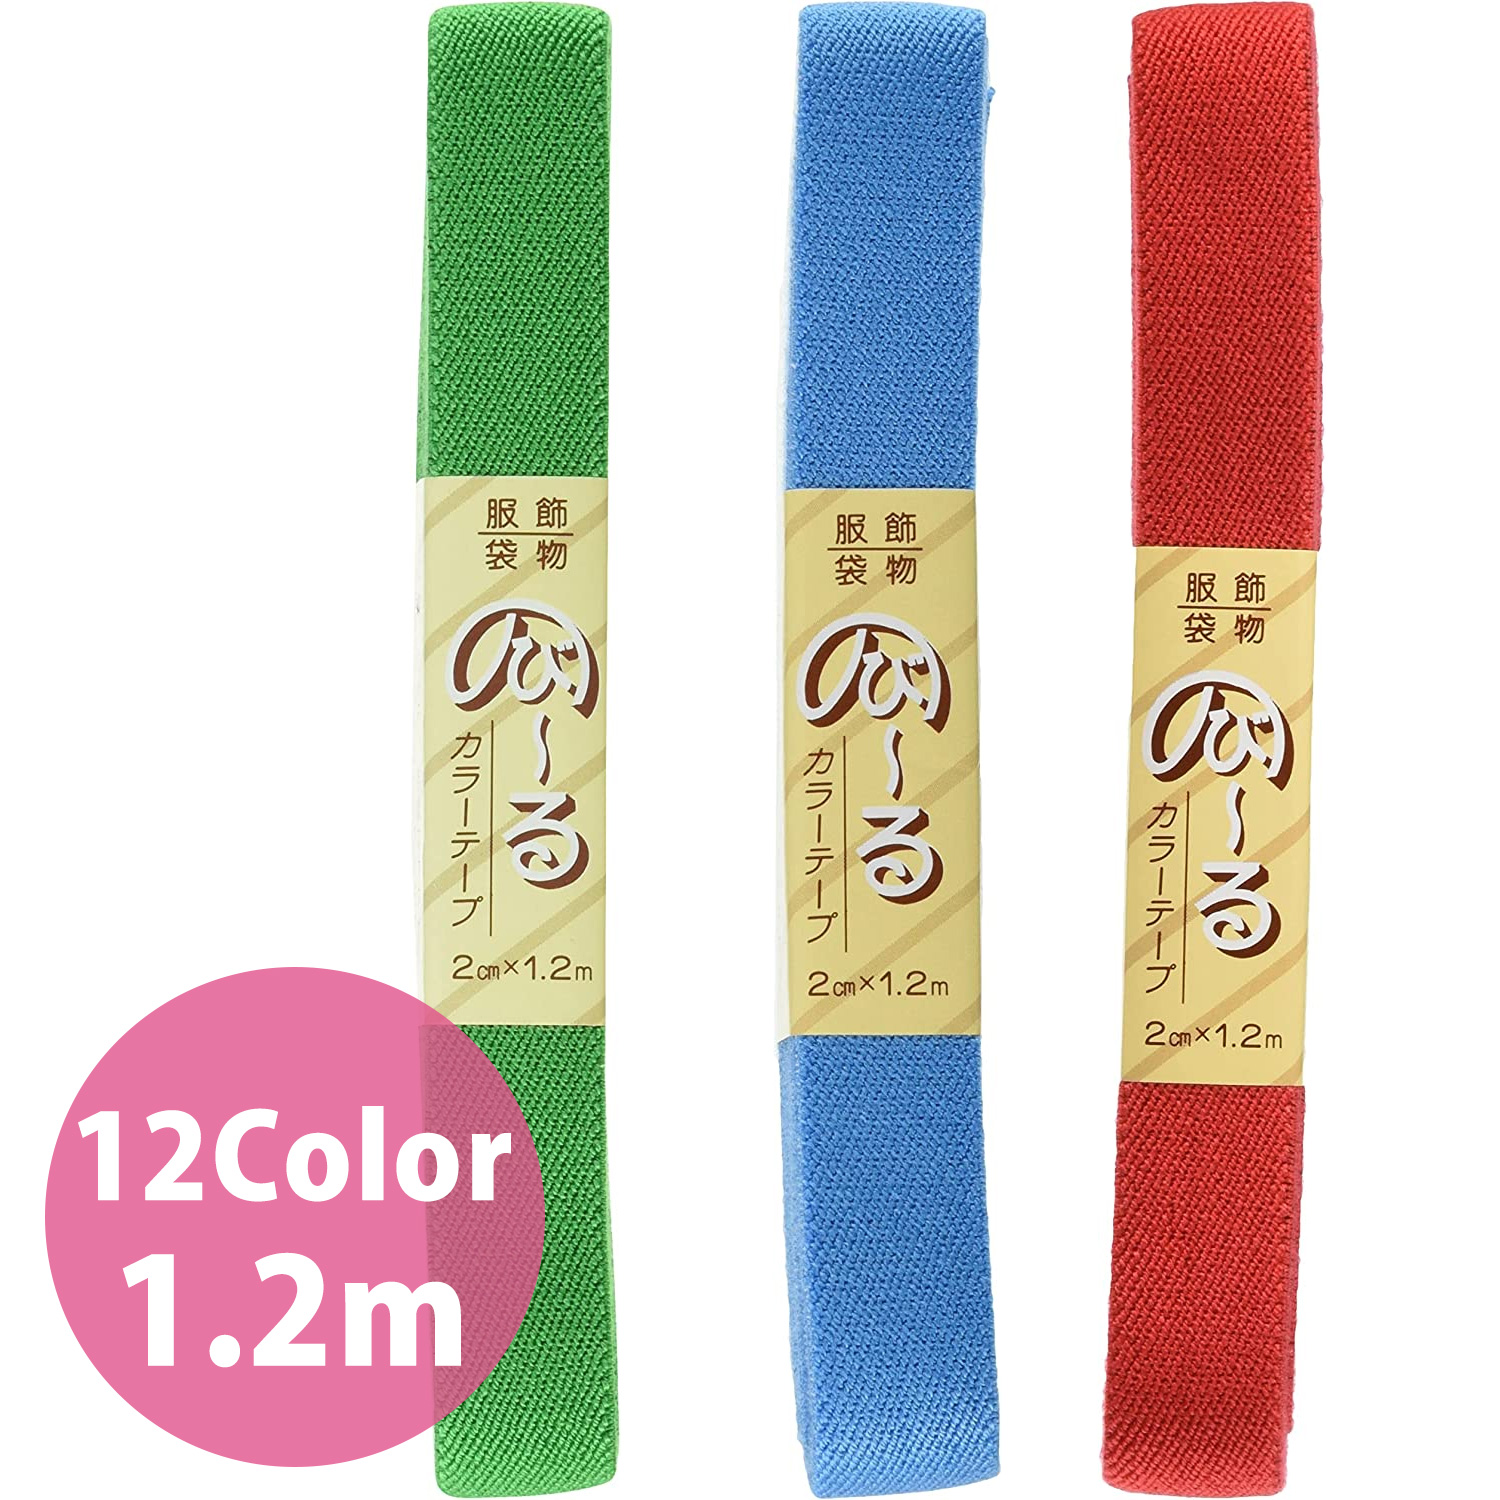 Stre-e-etchy Color Elastic Tape Width 20 mm x 1.2 m (Roll)